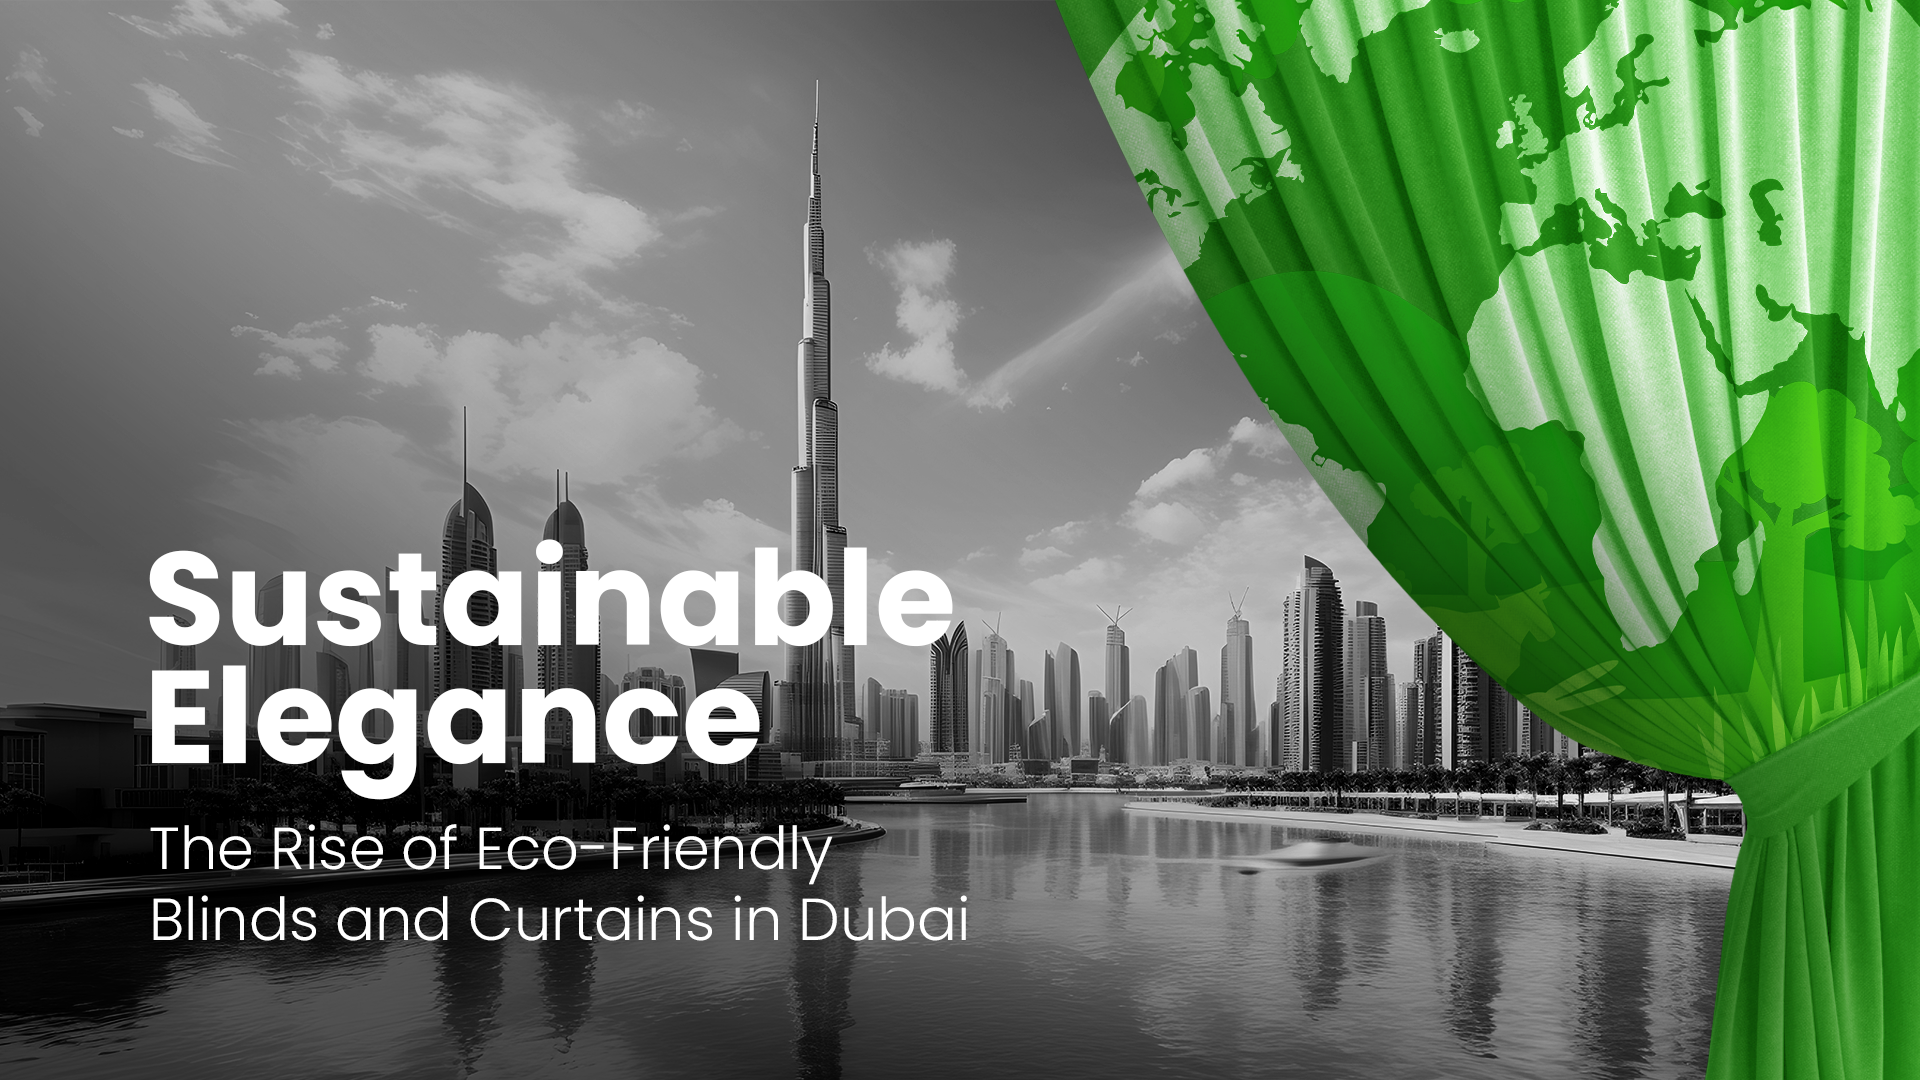 Sustainable Elegance: The Rise of Eco-Friendly Blinds and Curtains in Dubai